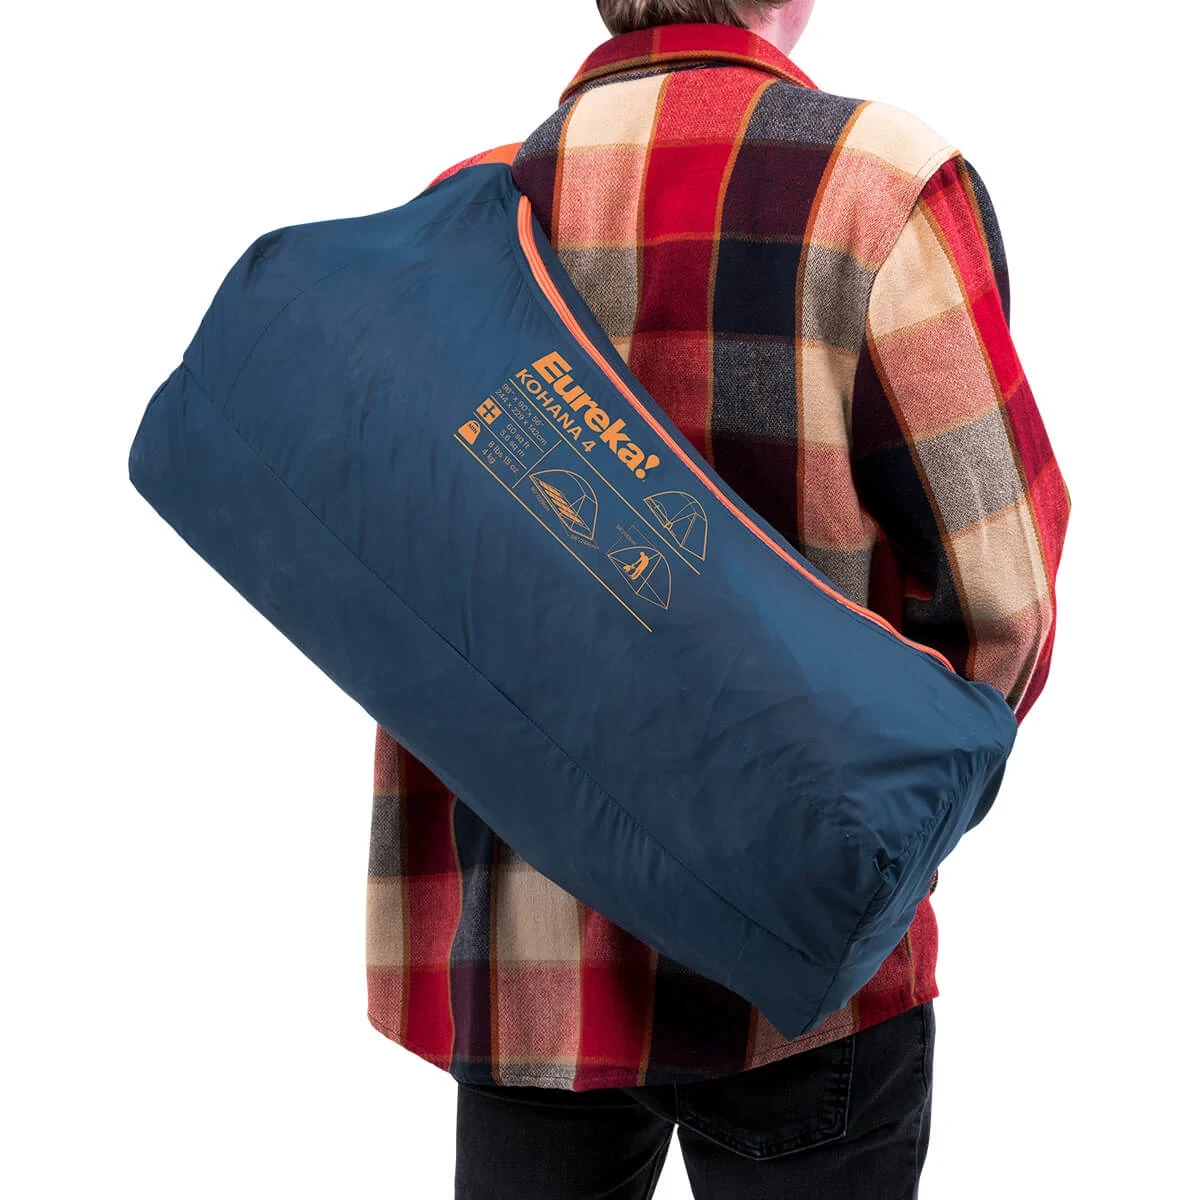 Person carrying packed Kohana 4 tent in carry bag